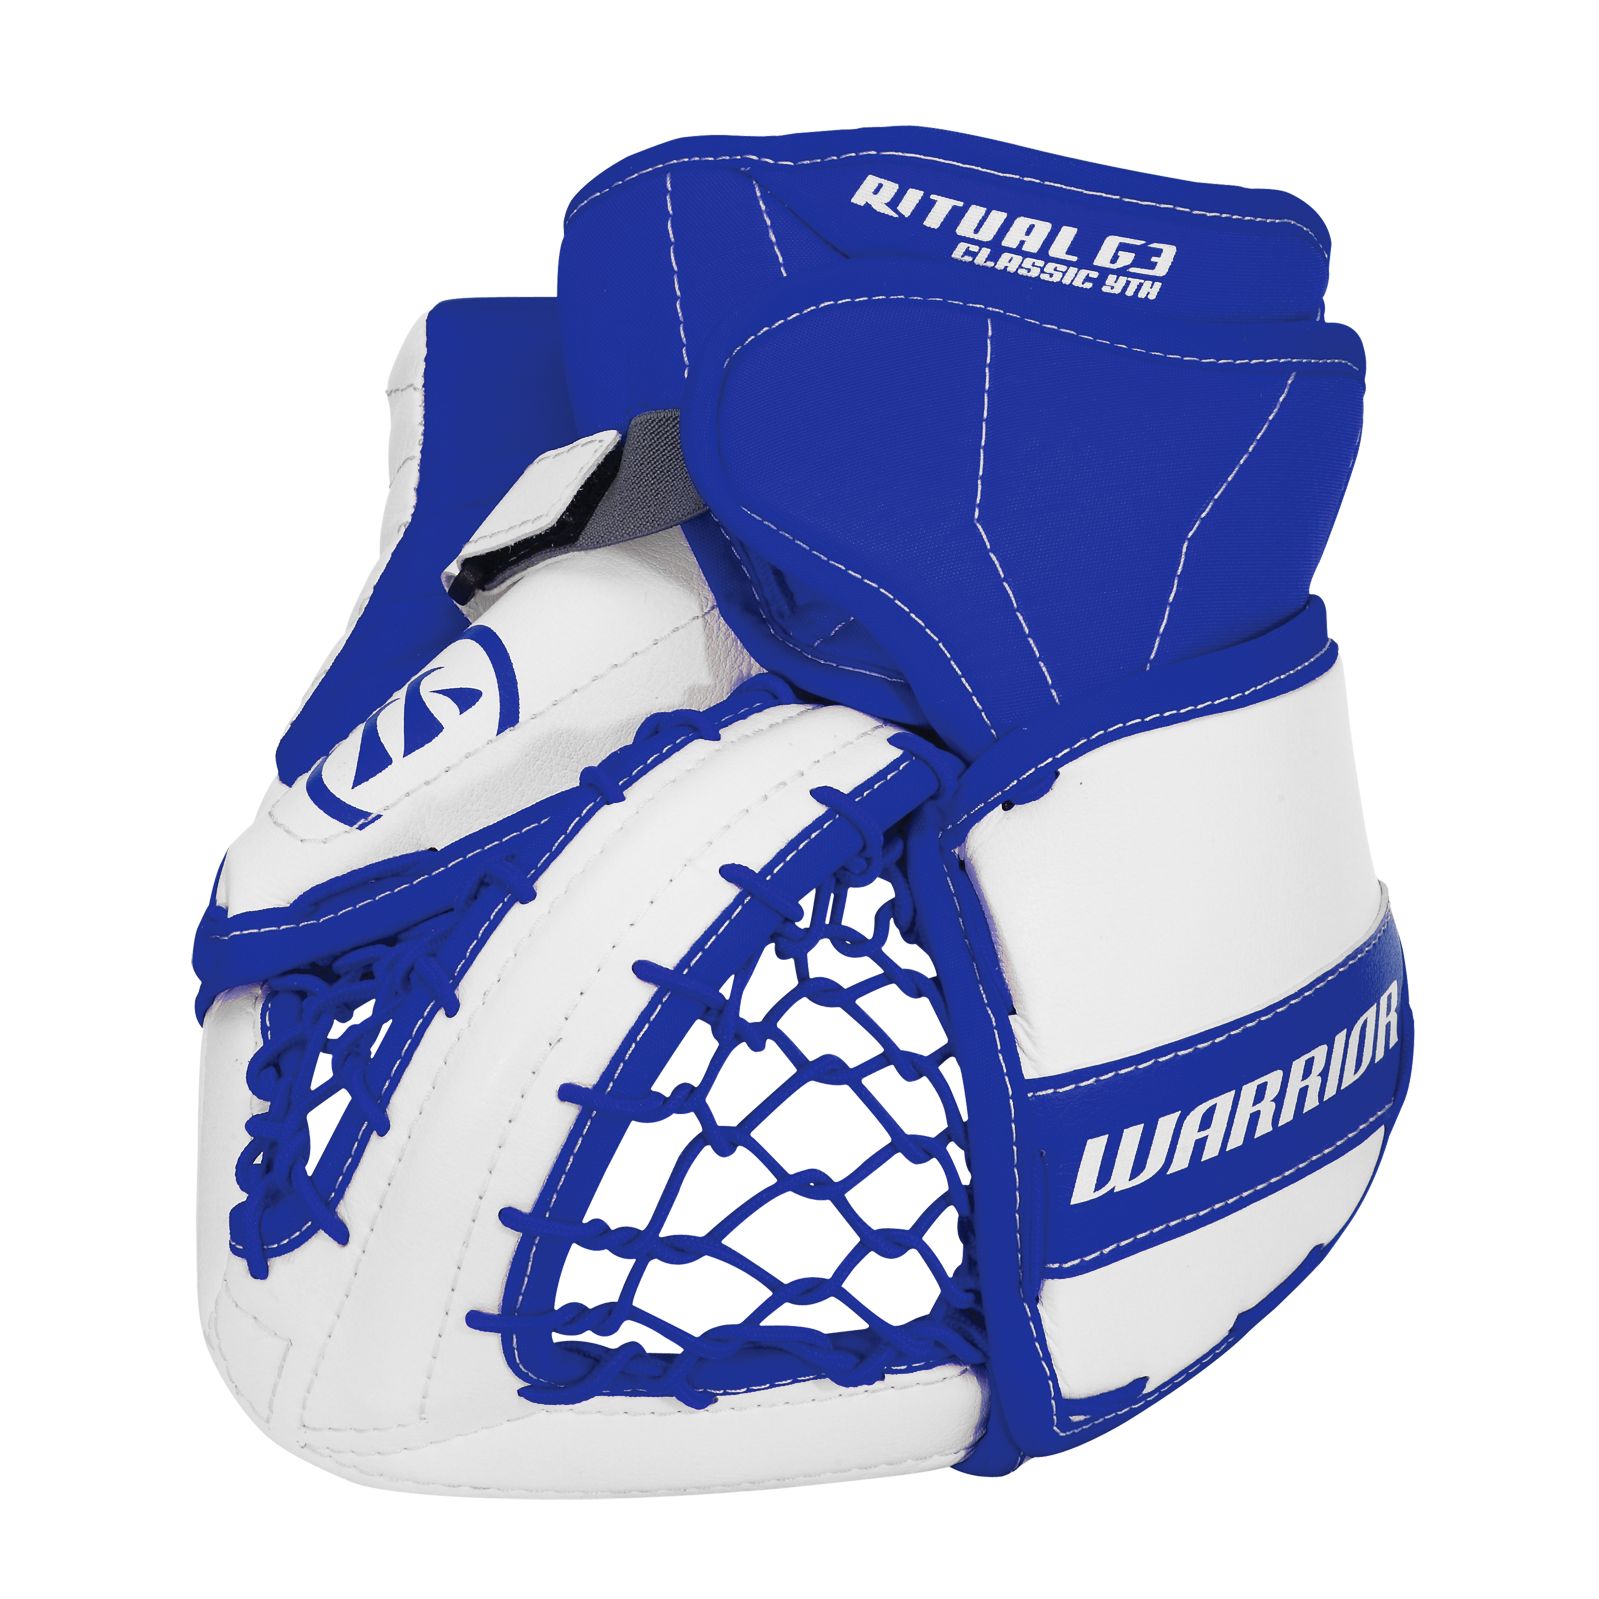 Ritual G3 Yth. Trapper, White with Royal Blue image number 1